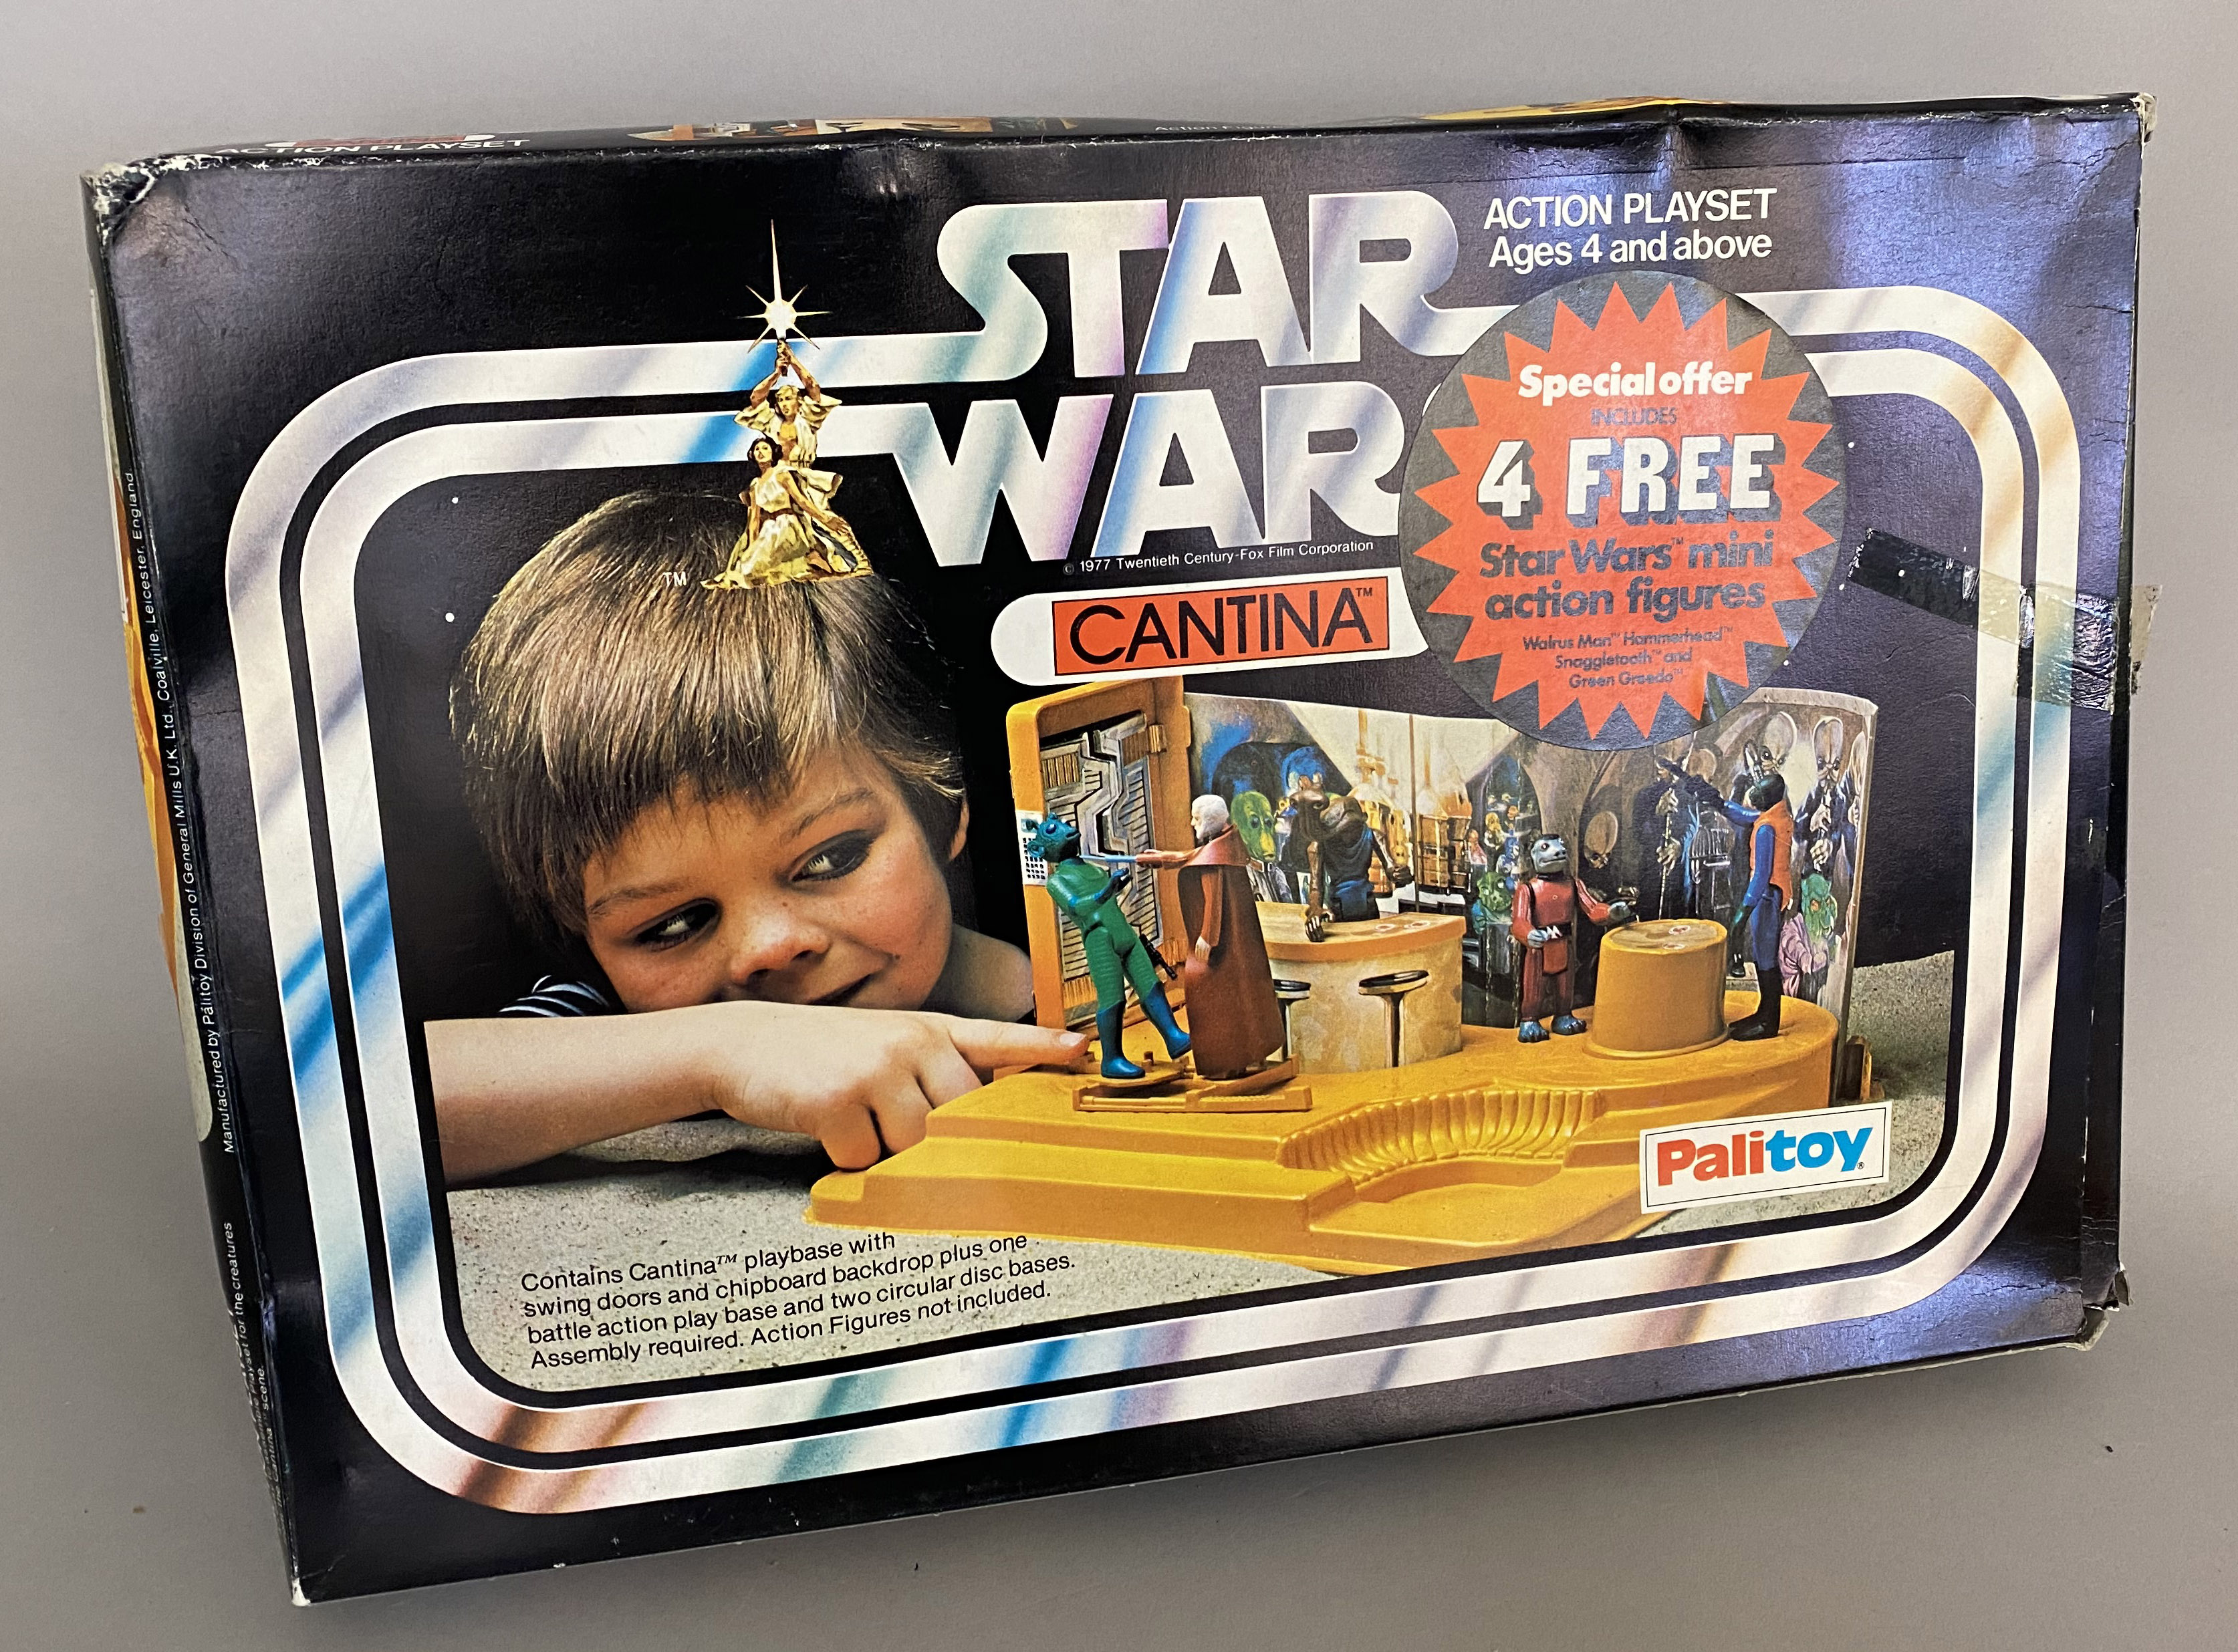 Palitoy Star Wars 33328 Cantina in original box, together with the 5 associated action figures for t - Image 3 of 3